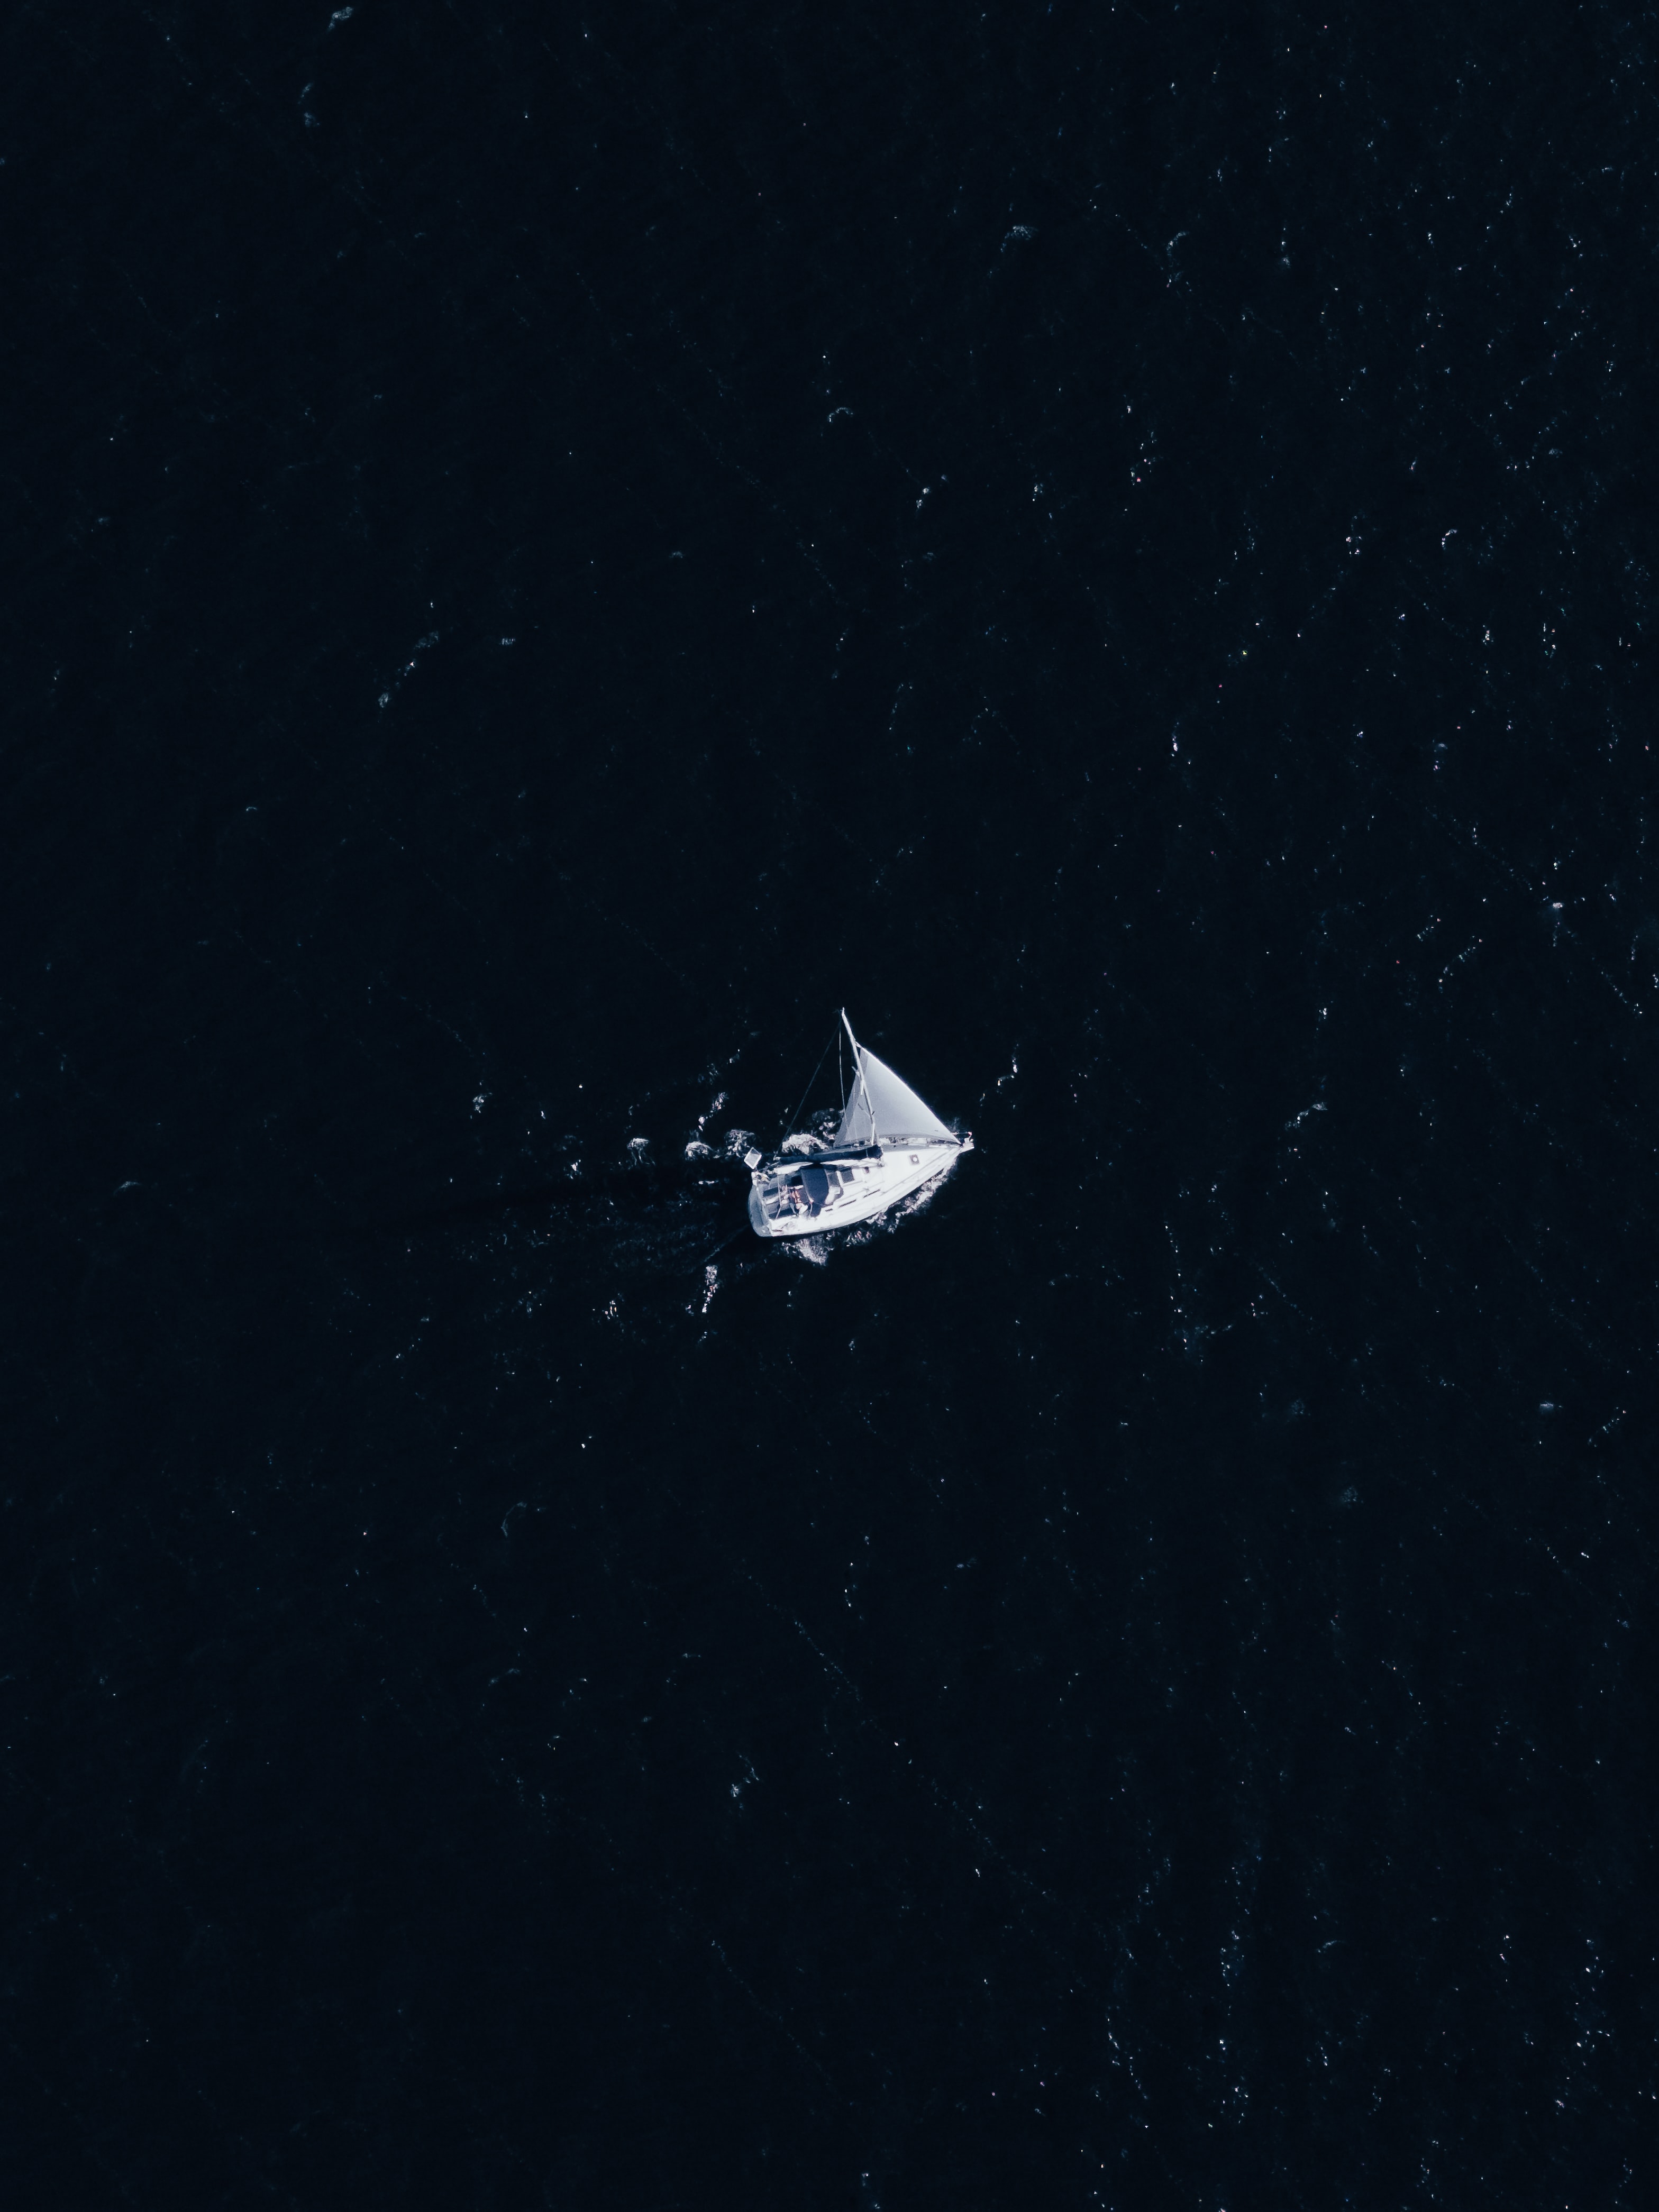 1080p pic boat, miscellaneous, view from above, sea